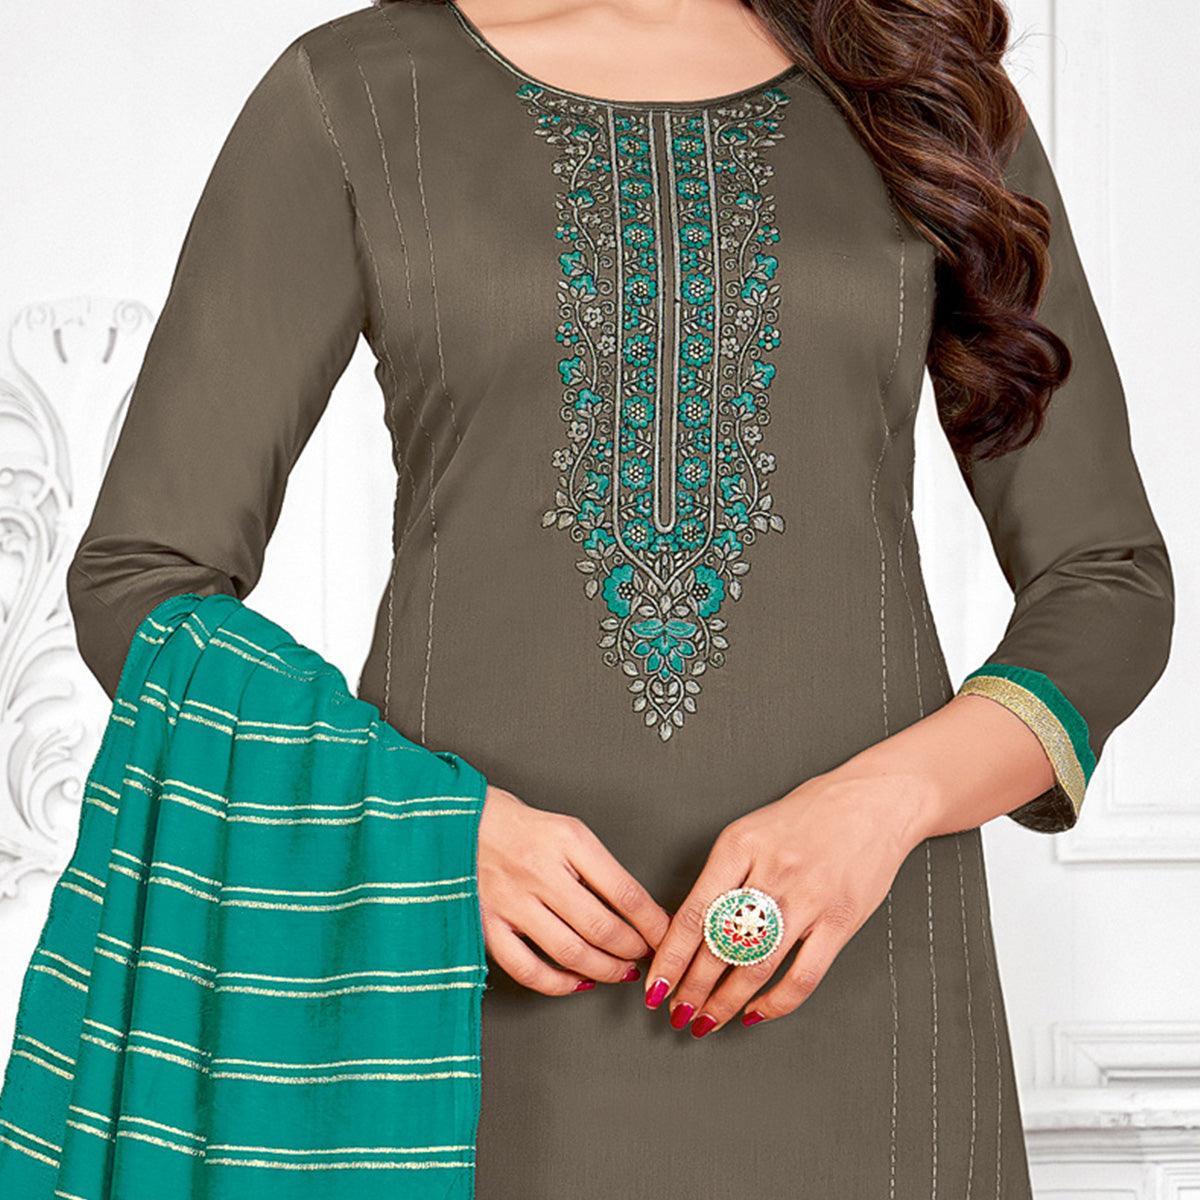 Imposing Steel-Grey Colored Partywear Designer Embroidery Cotton Salwar Suit - Peachmode